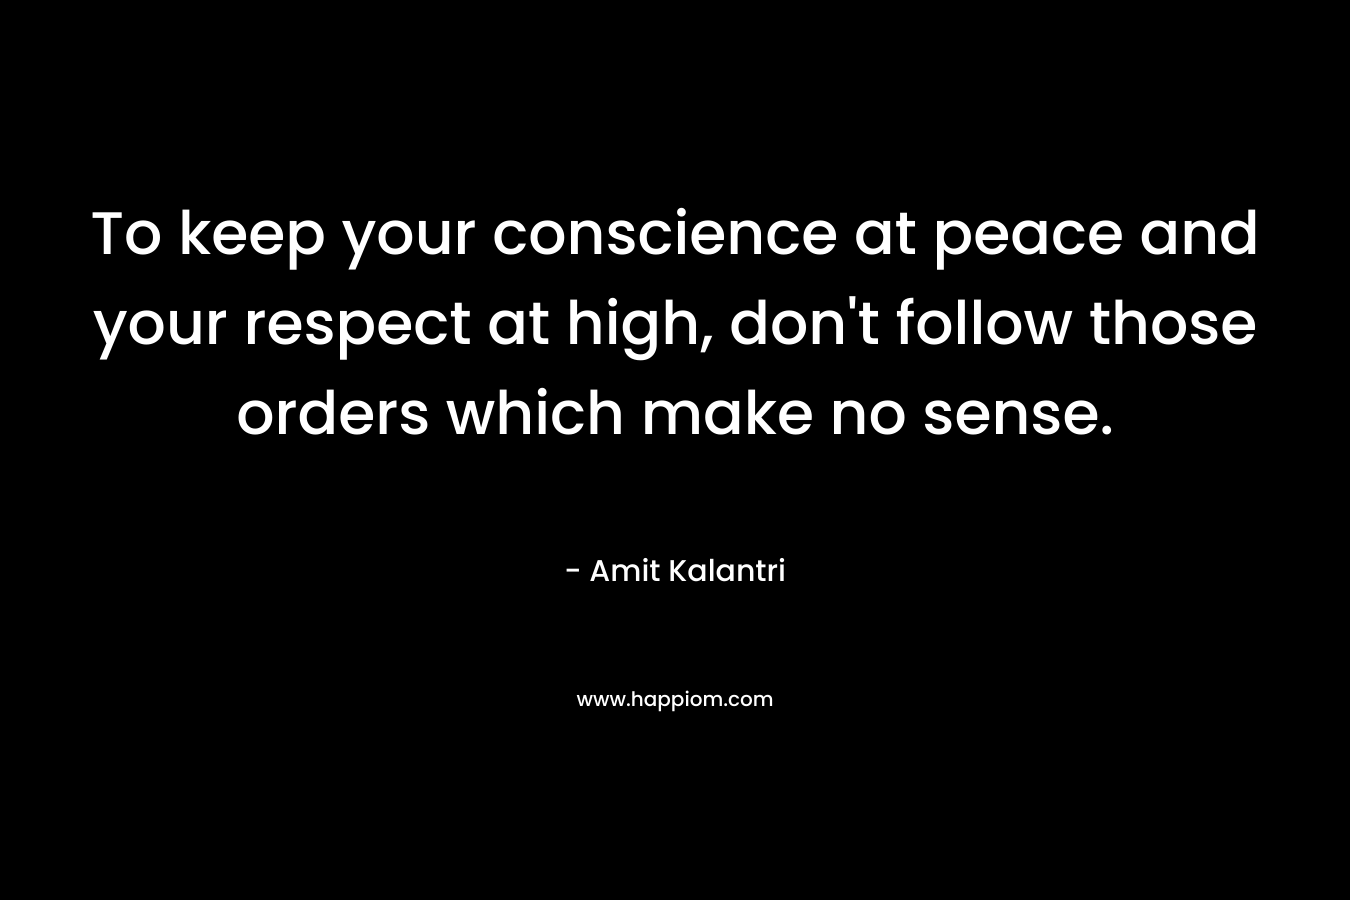 To keep your conscience at peace and your respect at high, don't follow those orders which make no sense.